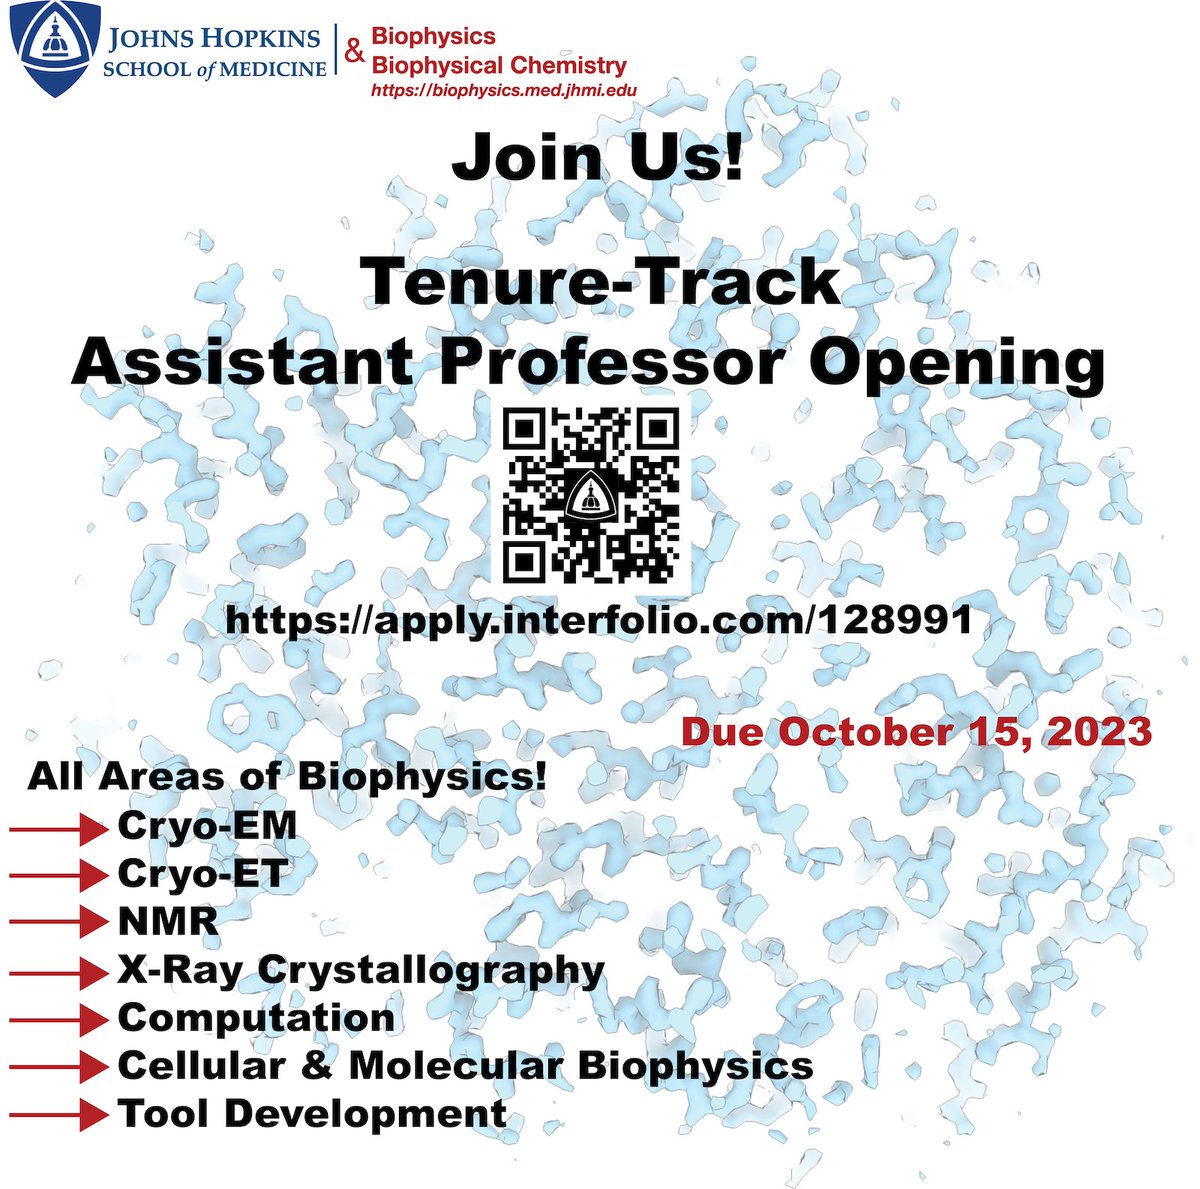 Please share! We're recruiting scientists to start their lab at @BiophysicsJHMed! Come and join the vibrant and collaborative research community at Hopkins. The deadline is Oct 15! Feel free to reach out w/ any questions. apply.interfolio.com/128991